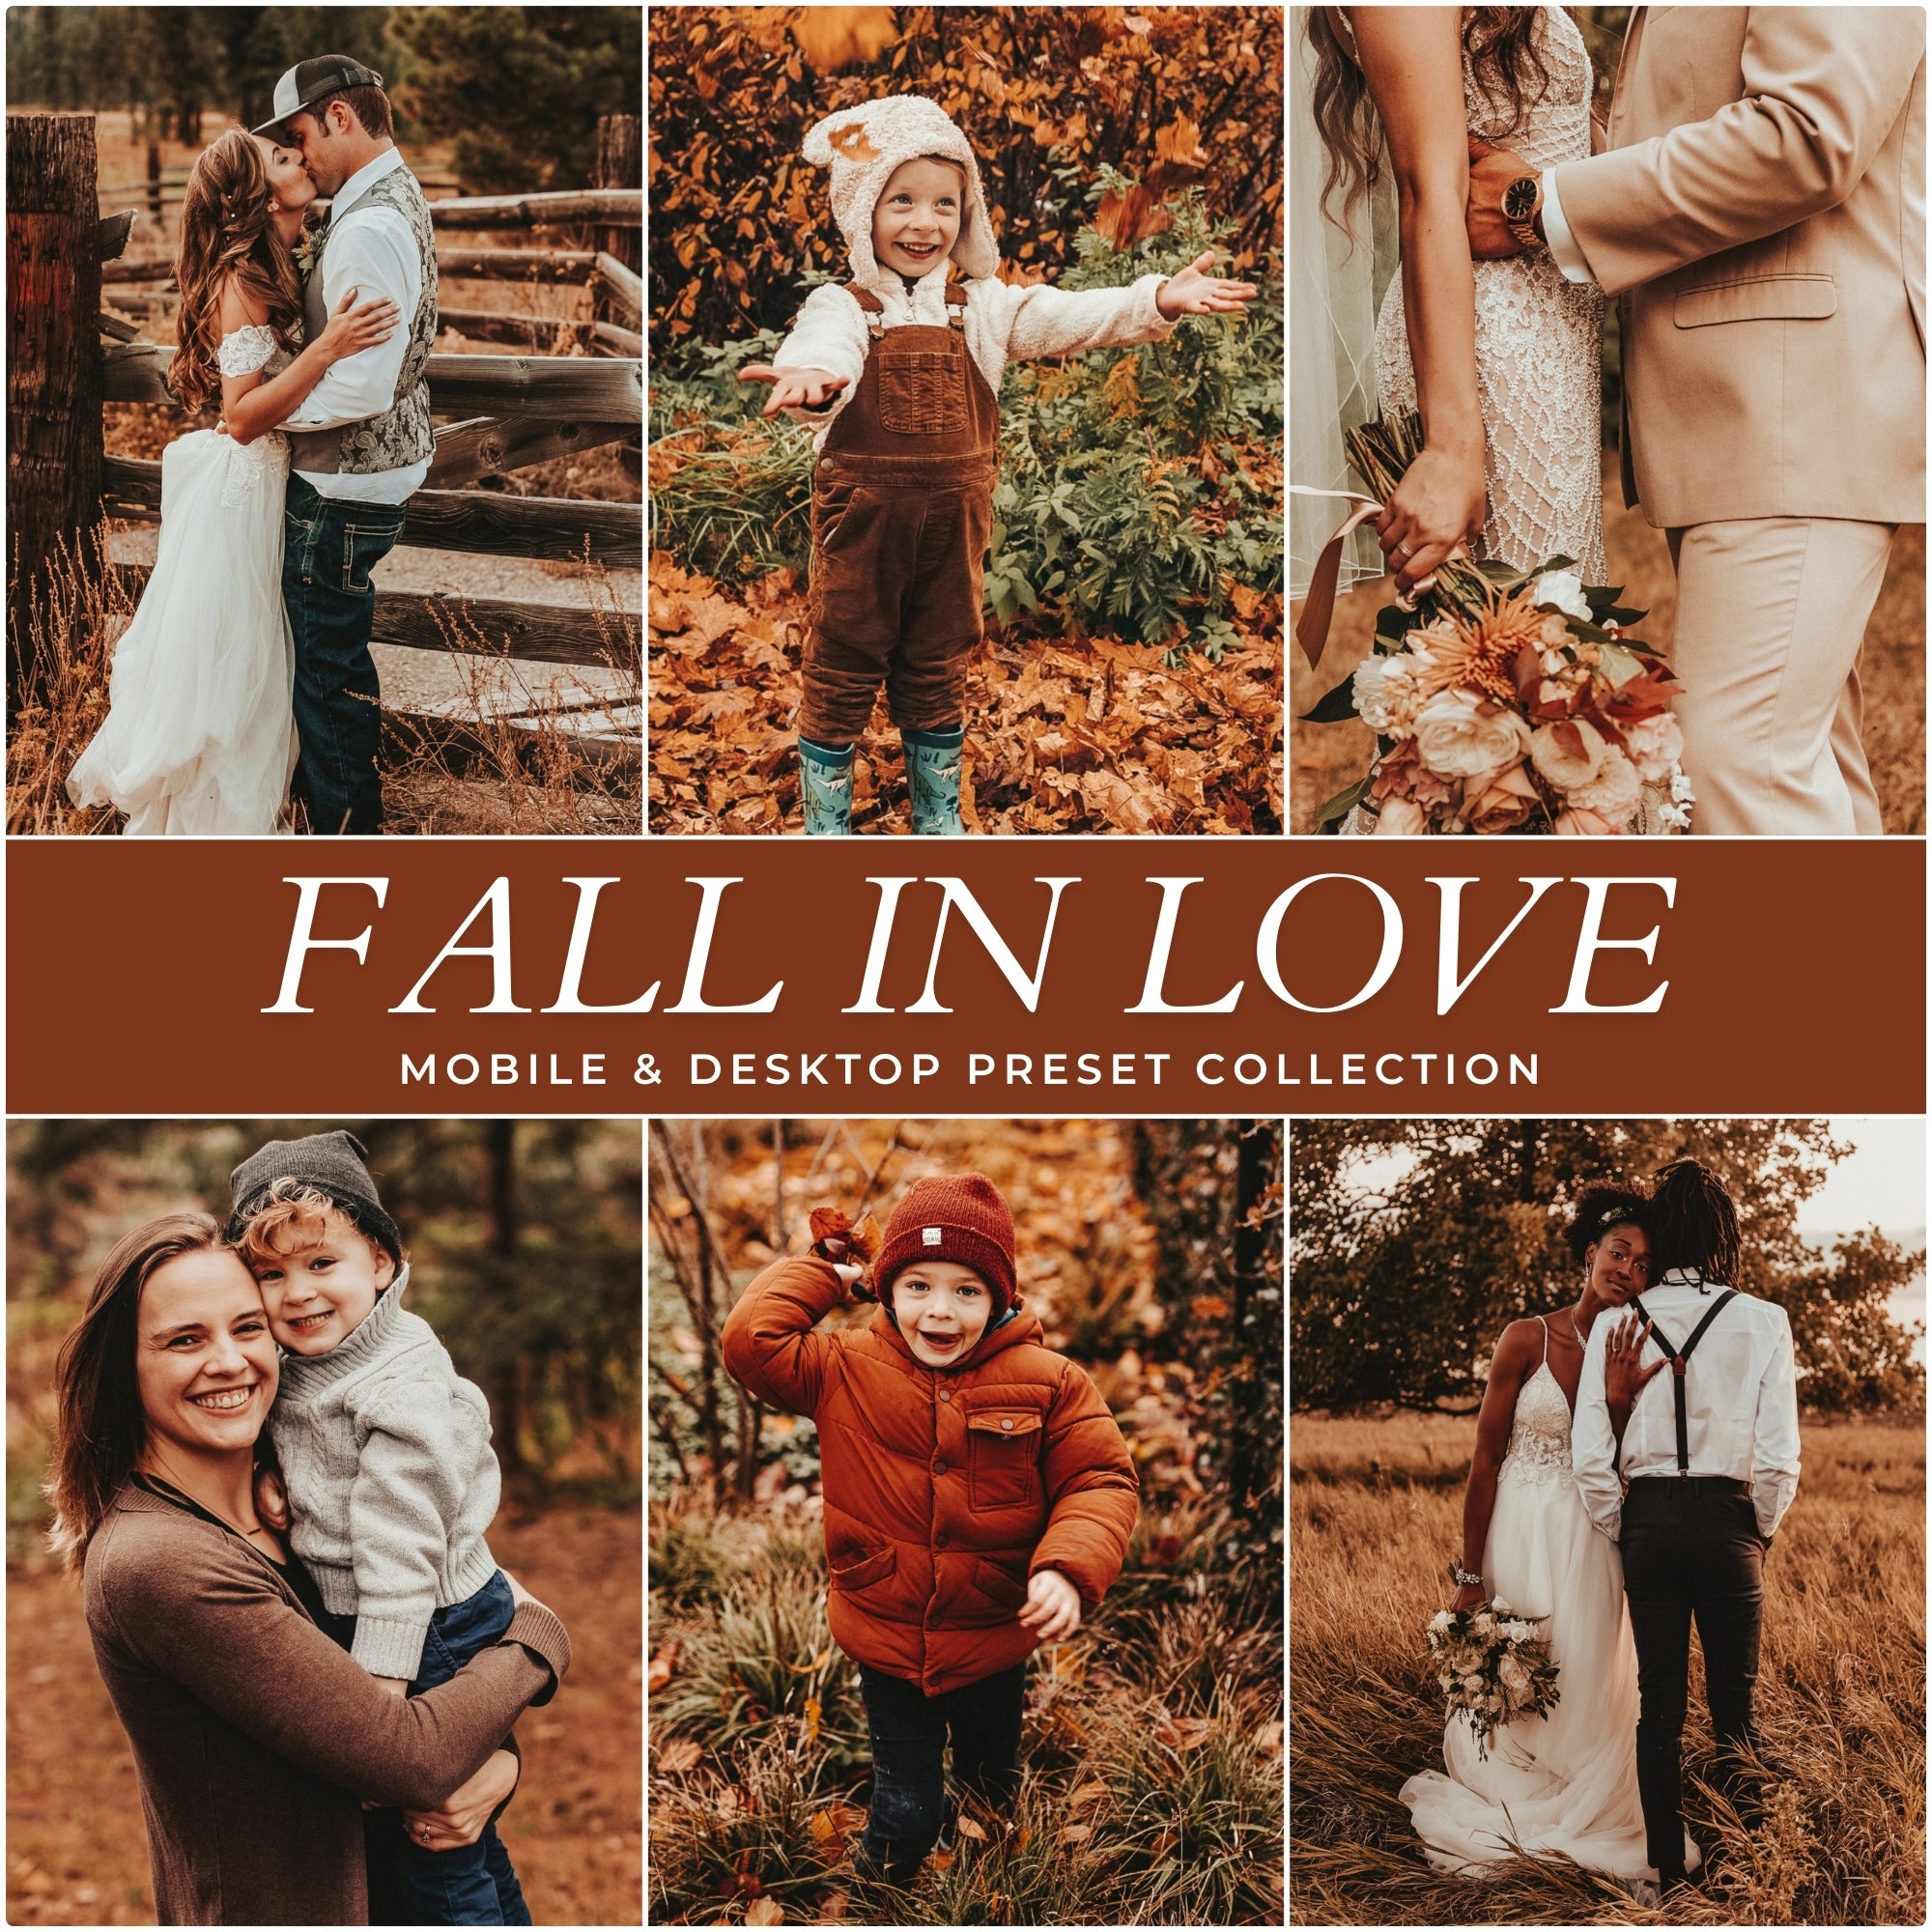 Fall In Love Lightroom Presets For Photographers and Instagram Influencers Photo Editing In Adobe Lightroom By Lou And Marks Presets